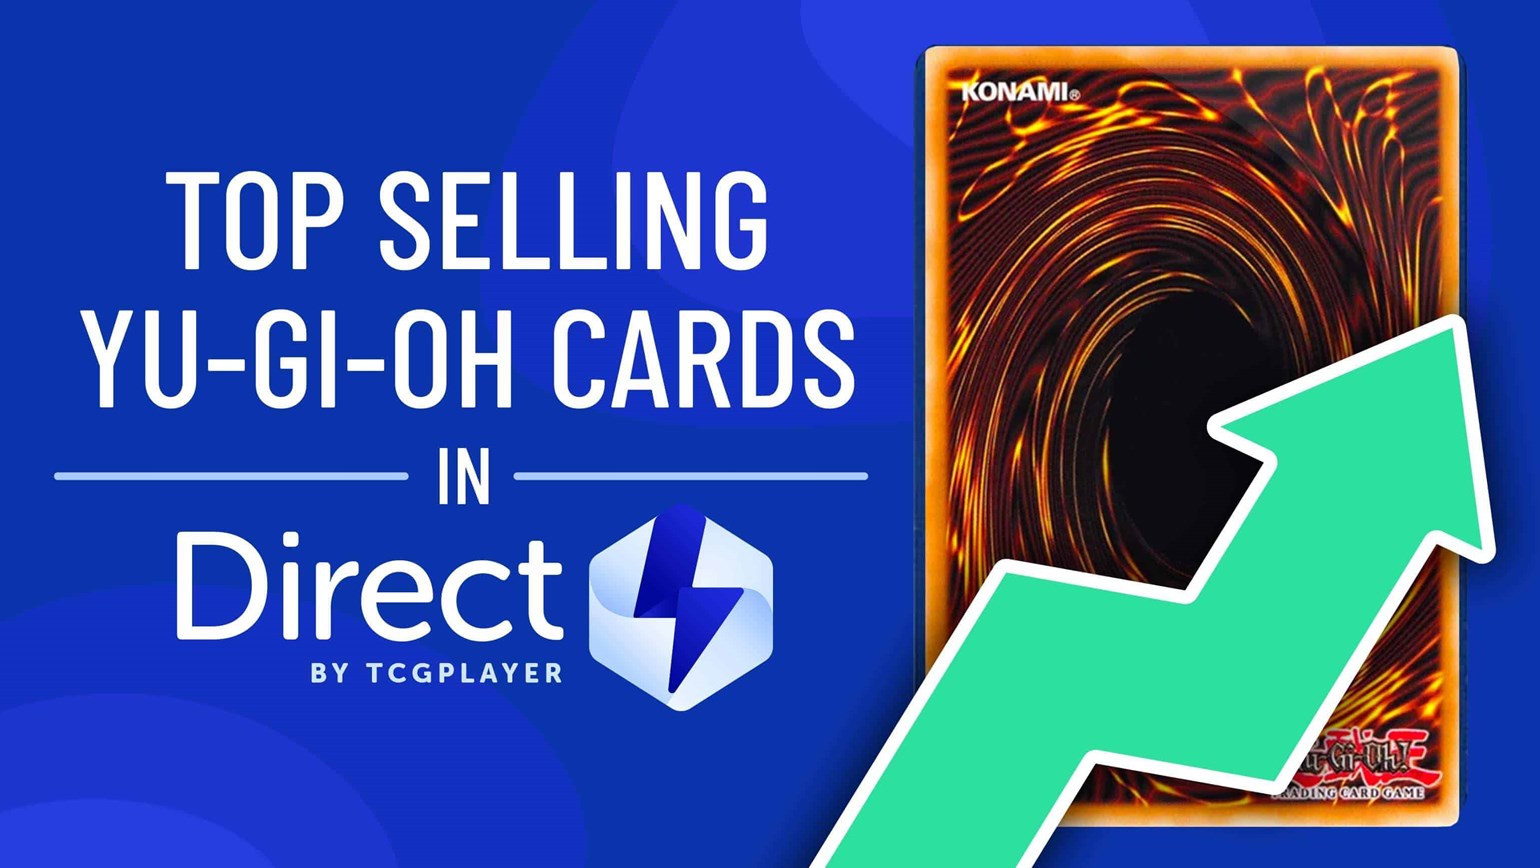 June Top Selling Yu-Gi-Oh! Cards in Direct by TCGplayer